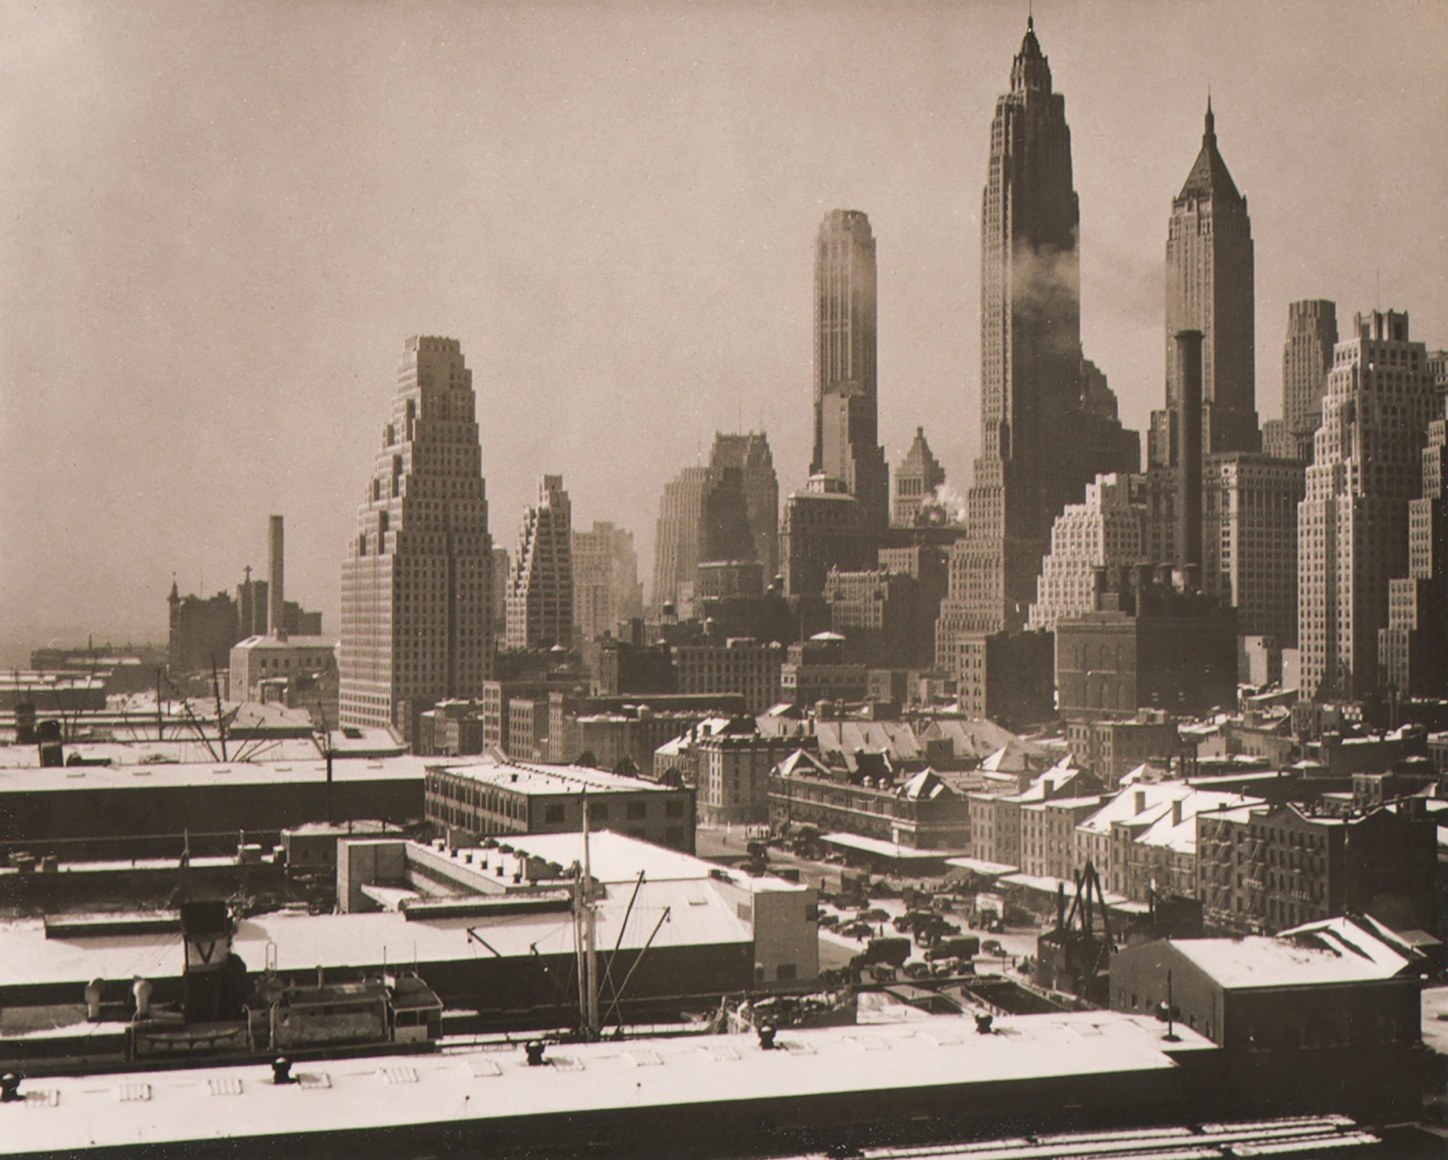 Paul J. Woolf, New York City Skyline, ​c. 1936. Day time cityscape with low buildings on the left and tall buildings on the right.